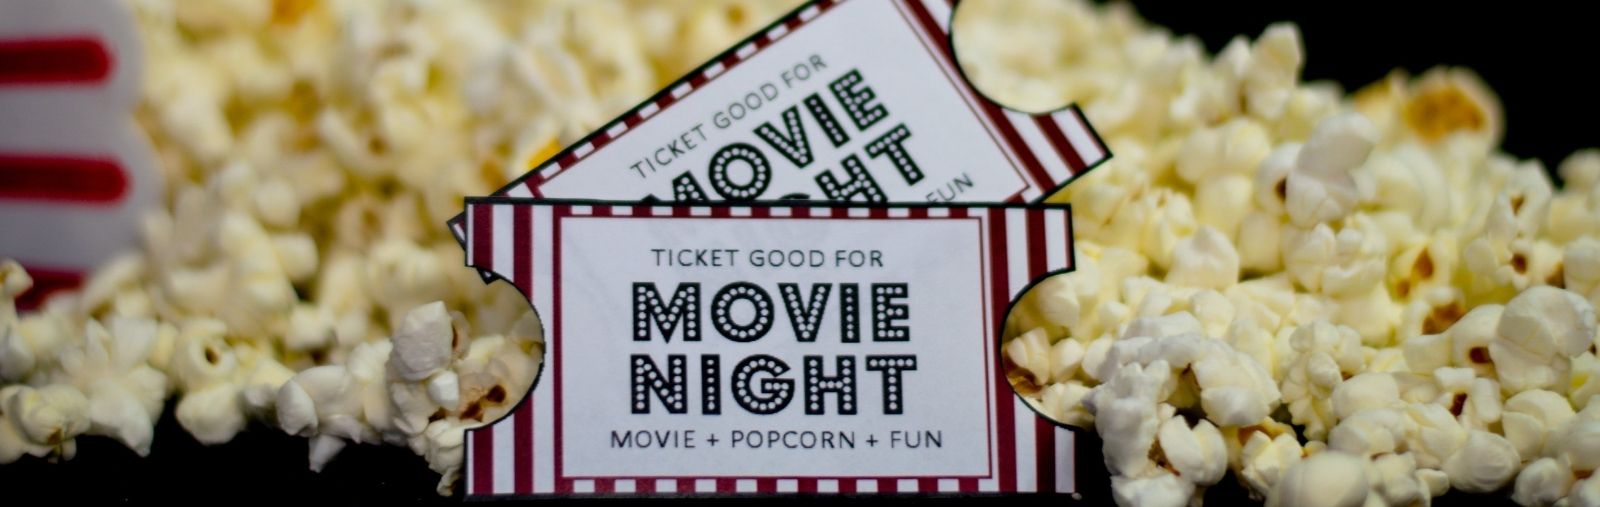 Movie tickets in front of popcorn